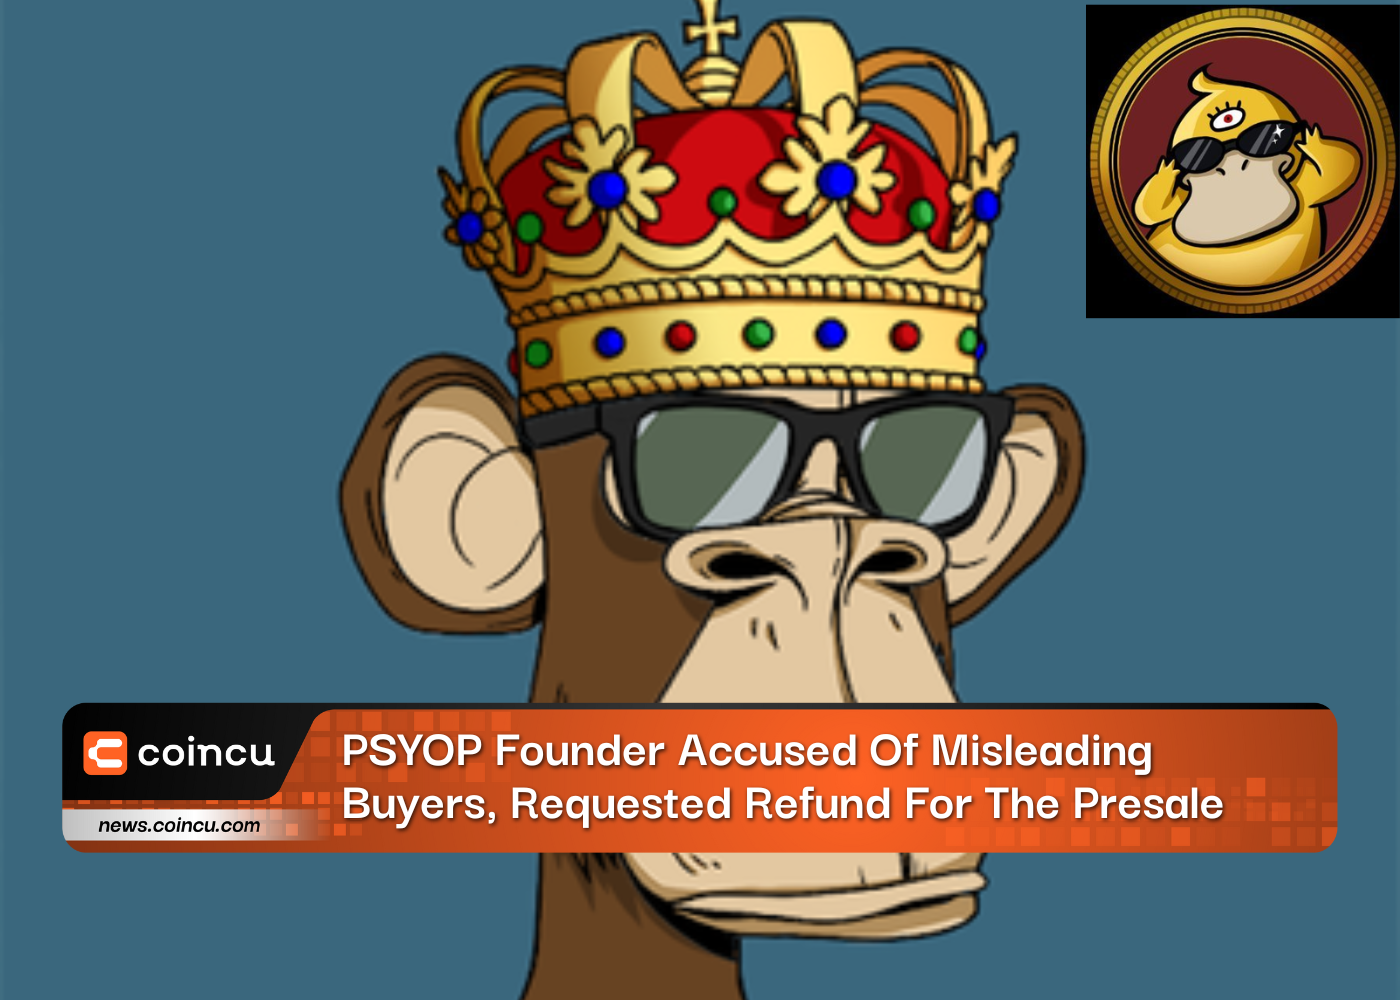 PSYOP Founder Accused Of Misleading Buyers, Requested Refund For The Presale